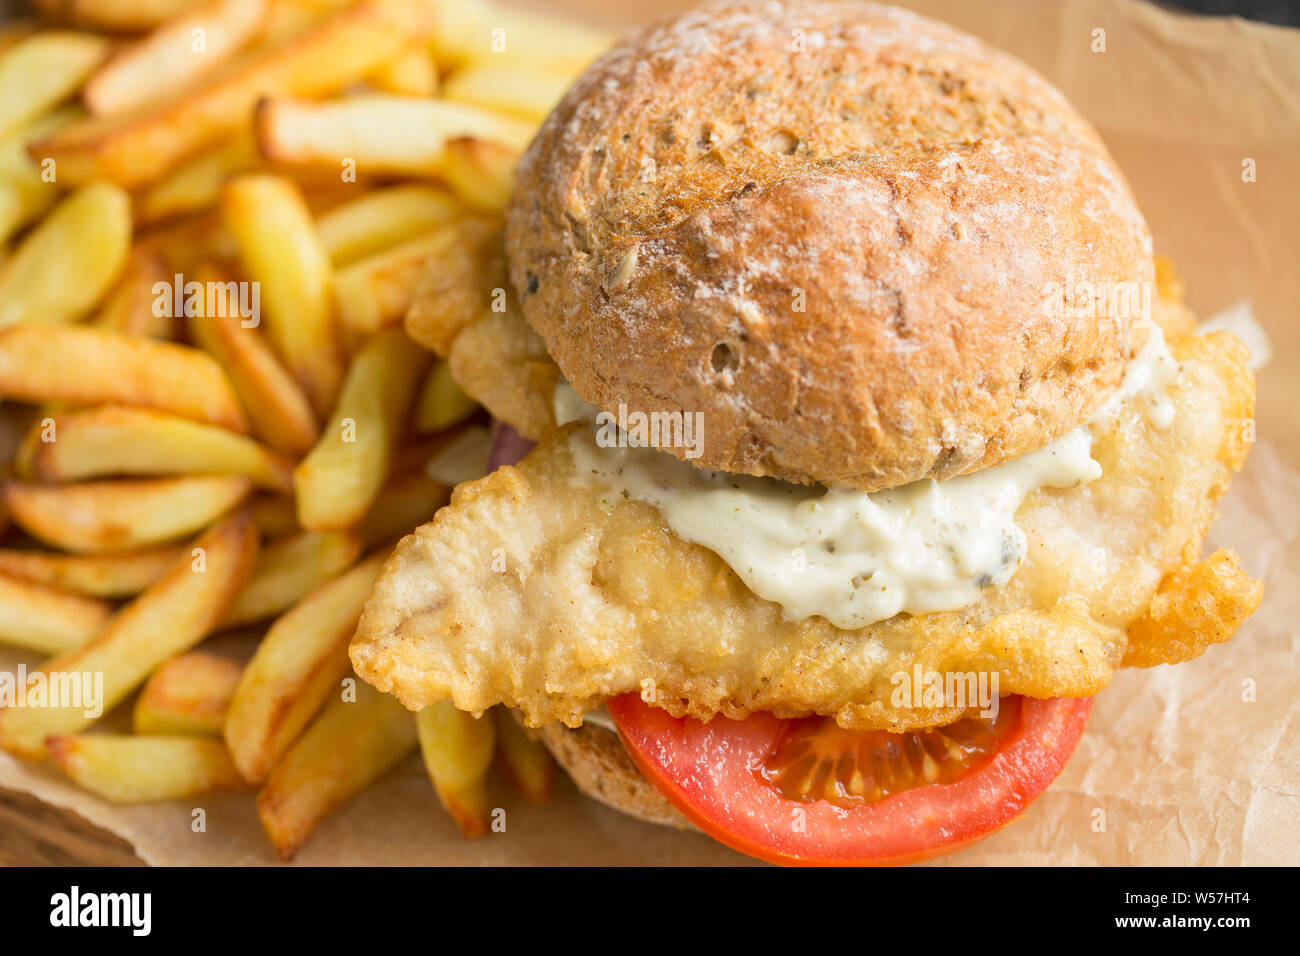 Two fillets of mackerel, Scomber scombrus, that have been dipped in flour and batter and deep fried to make a homemade mackerel burger. The mackerel w Stock Photo